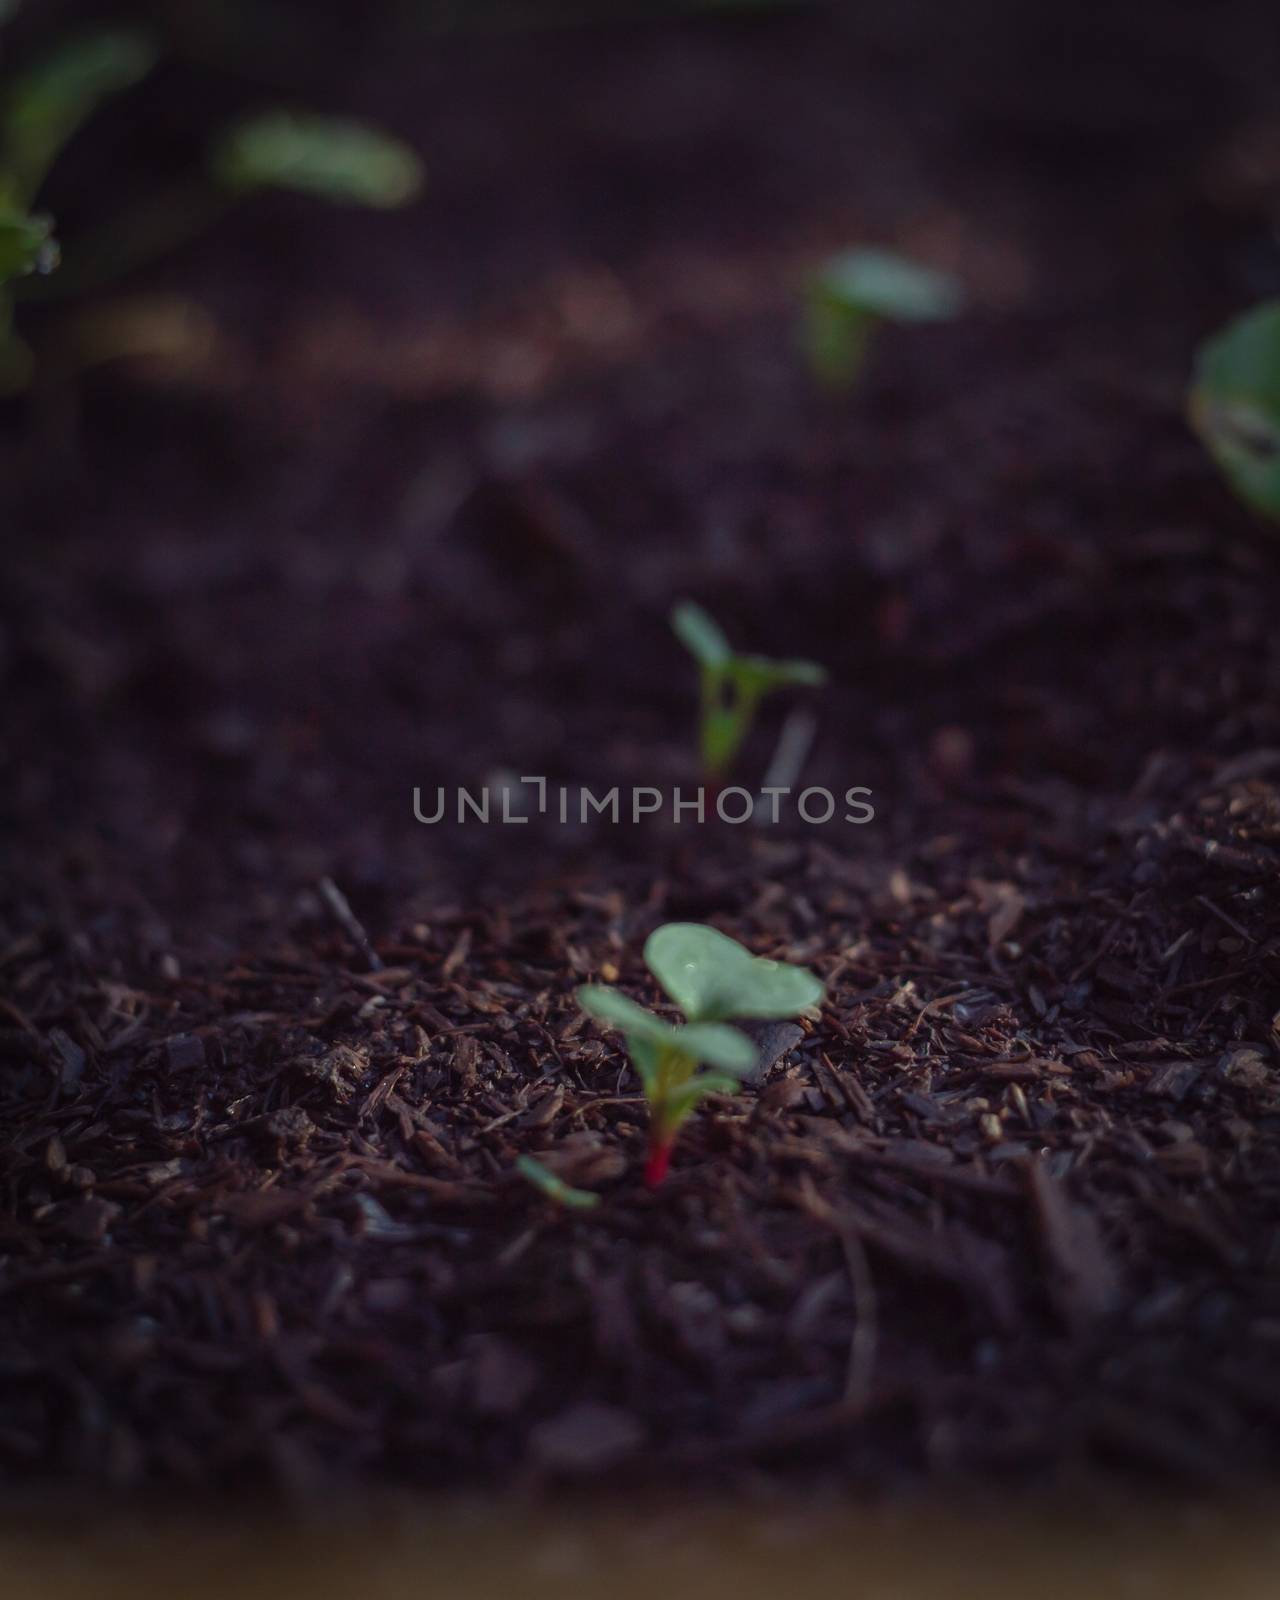 Vintage tone close-up organic radish sprouts growing from the ground. Young radishes plant sprouts with water drop on garden bed soil. Agricultural background